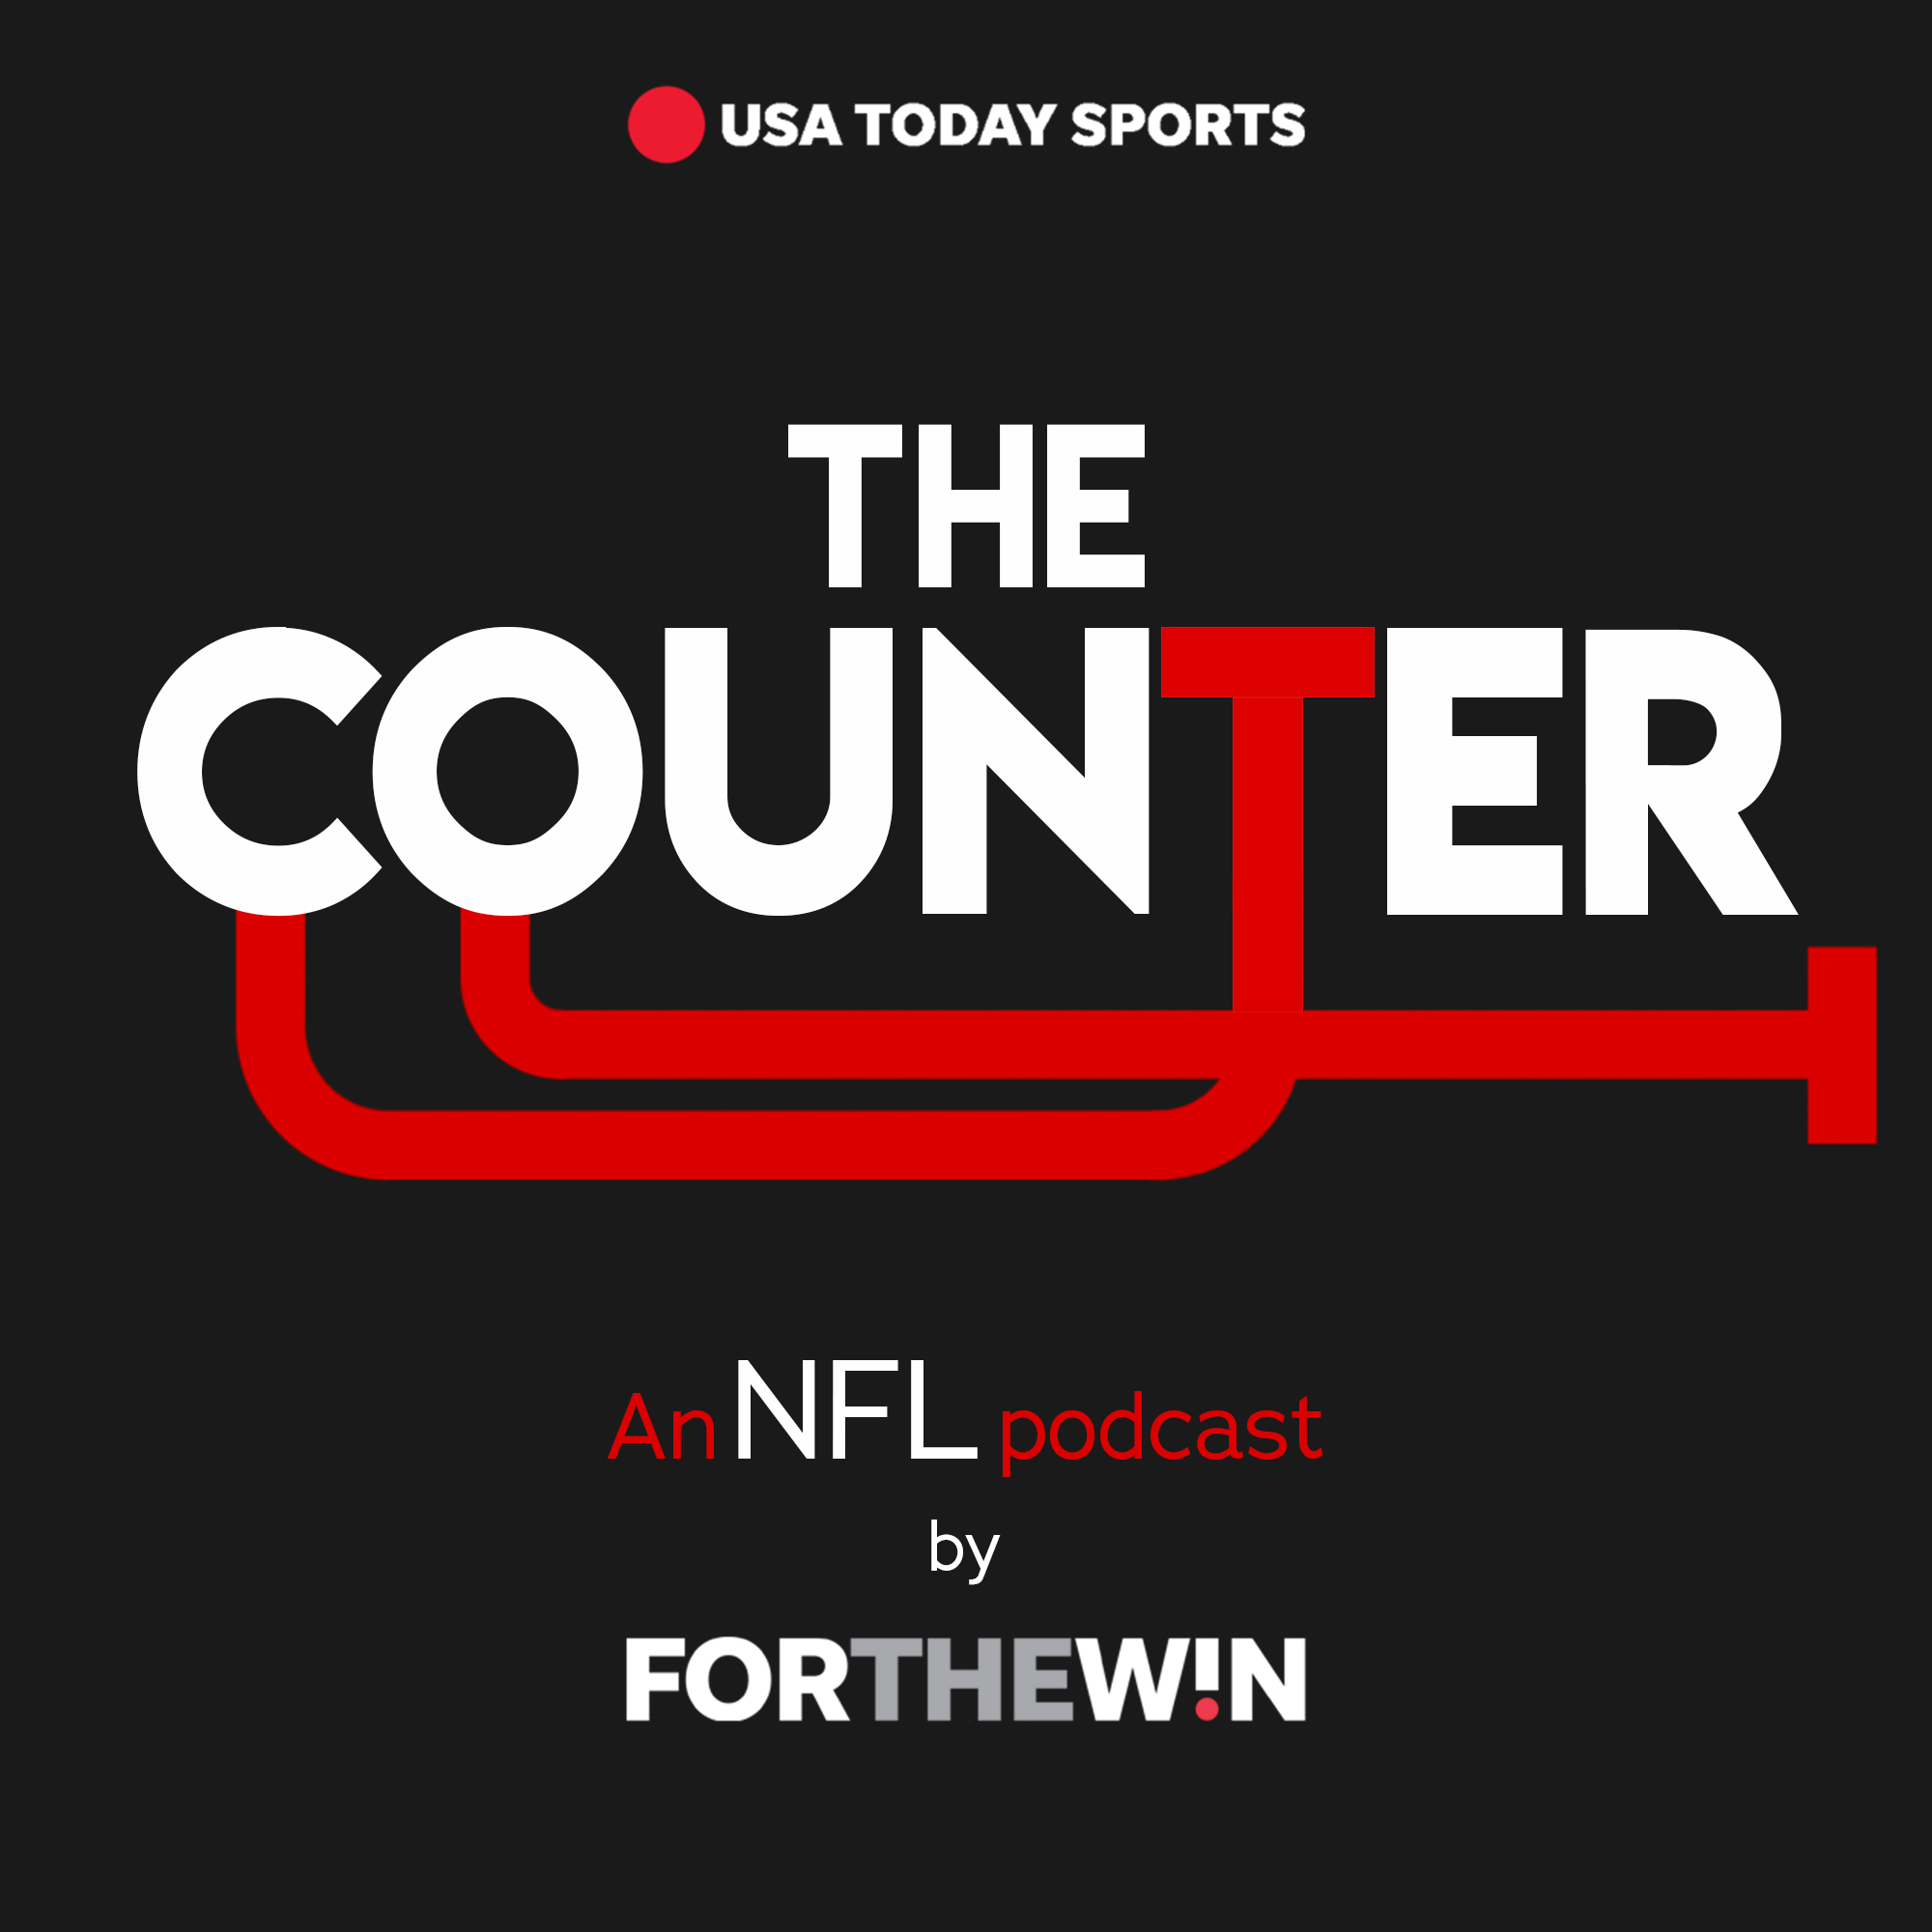 The Counter: An NFL Podcast by For The Win - One of the best weekends of football ever